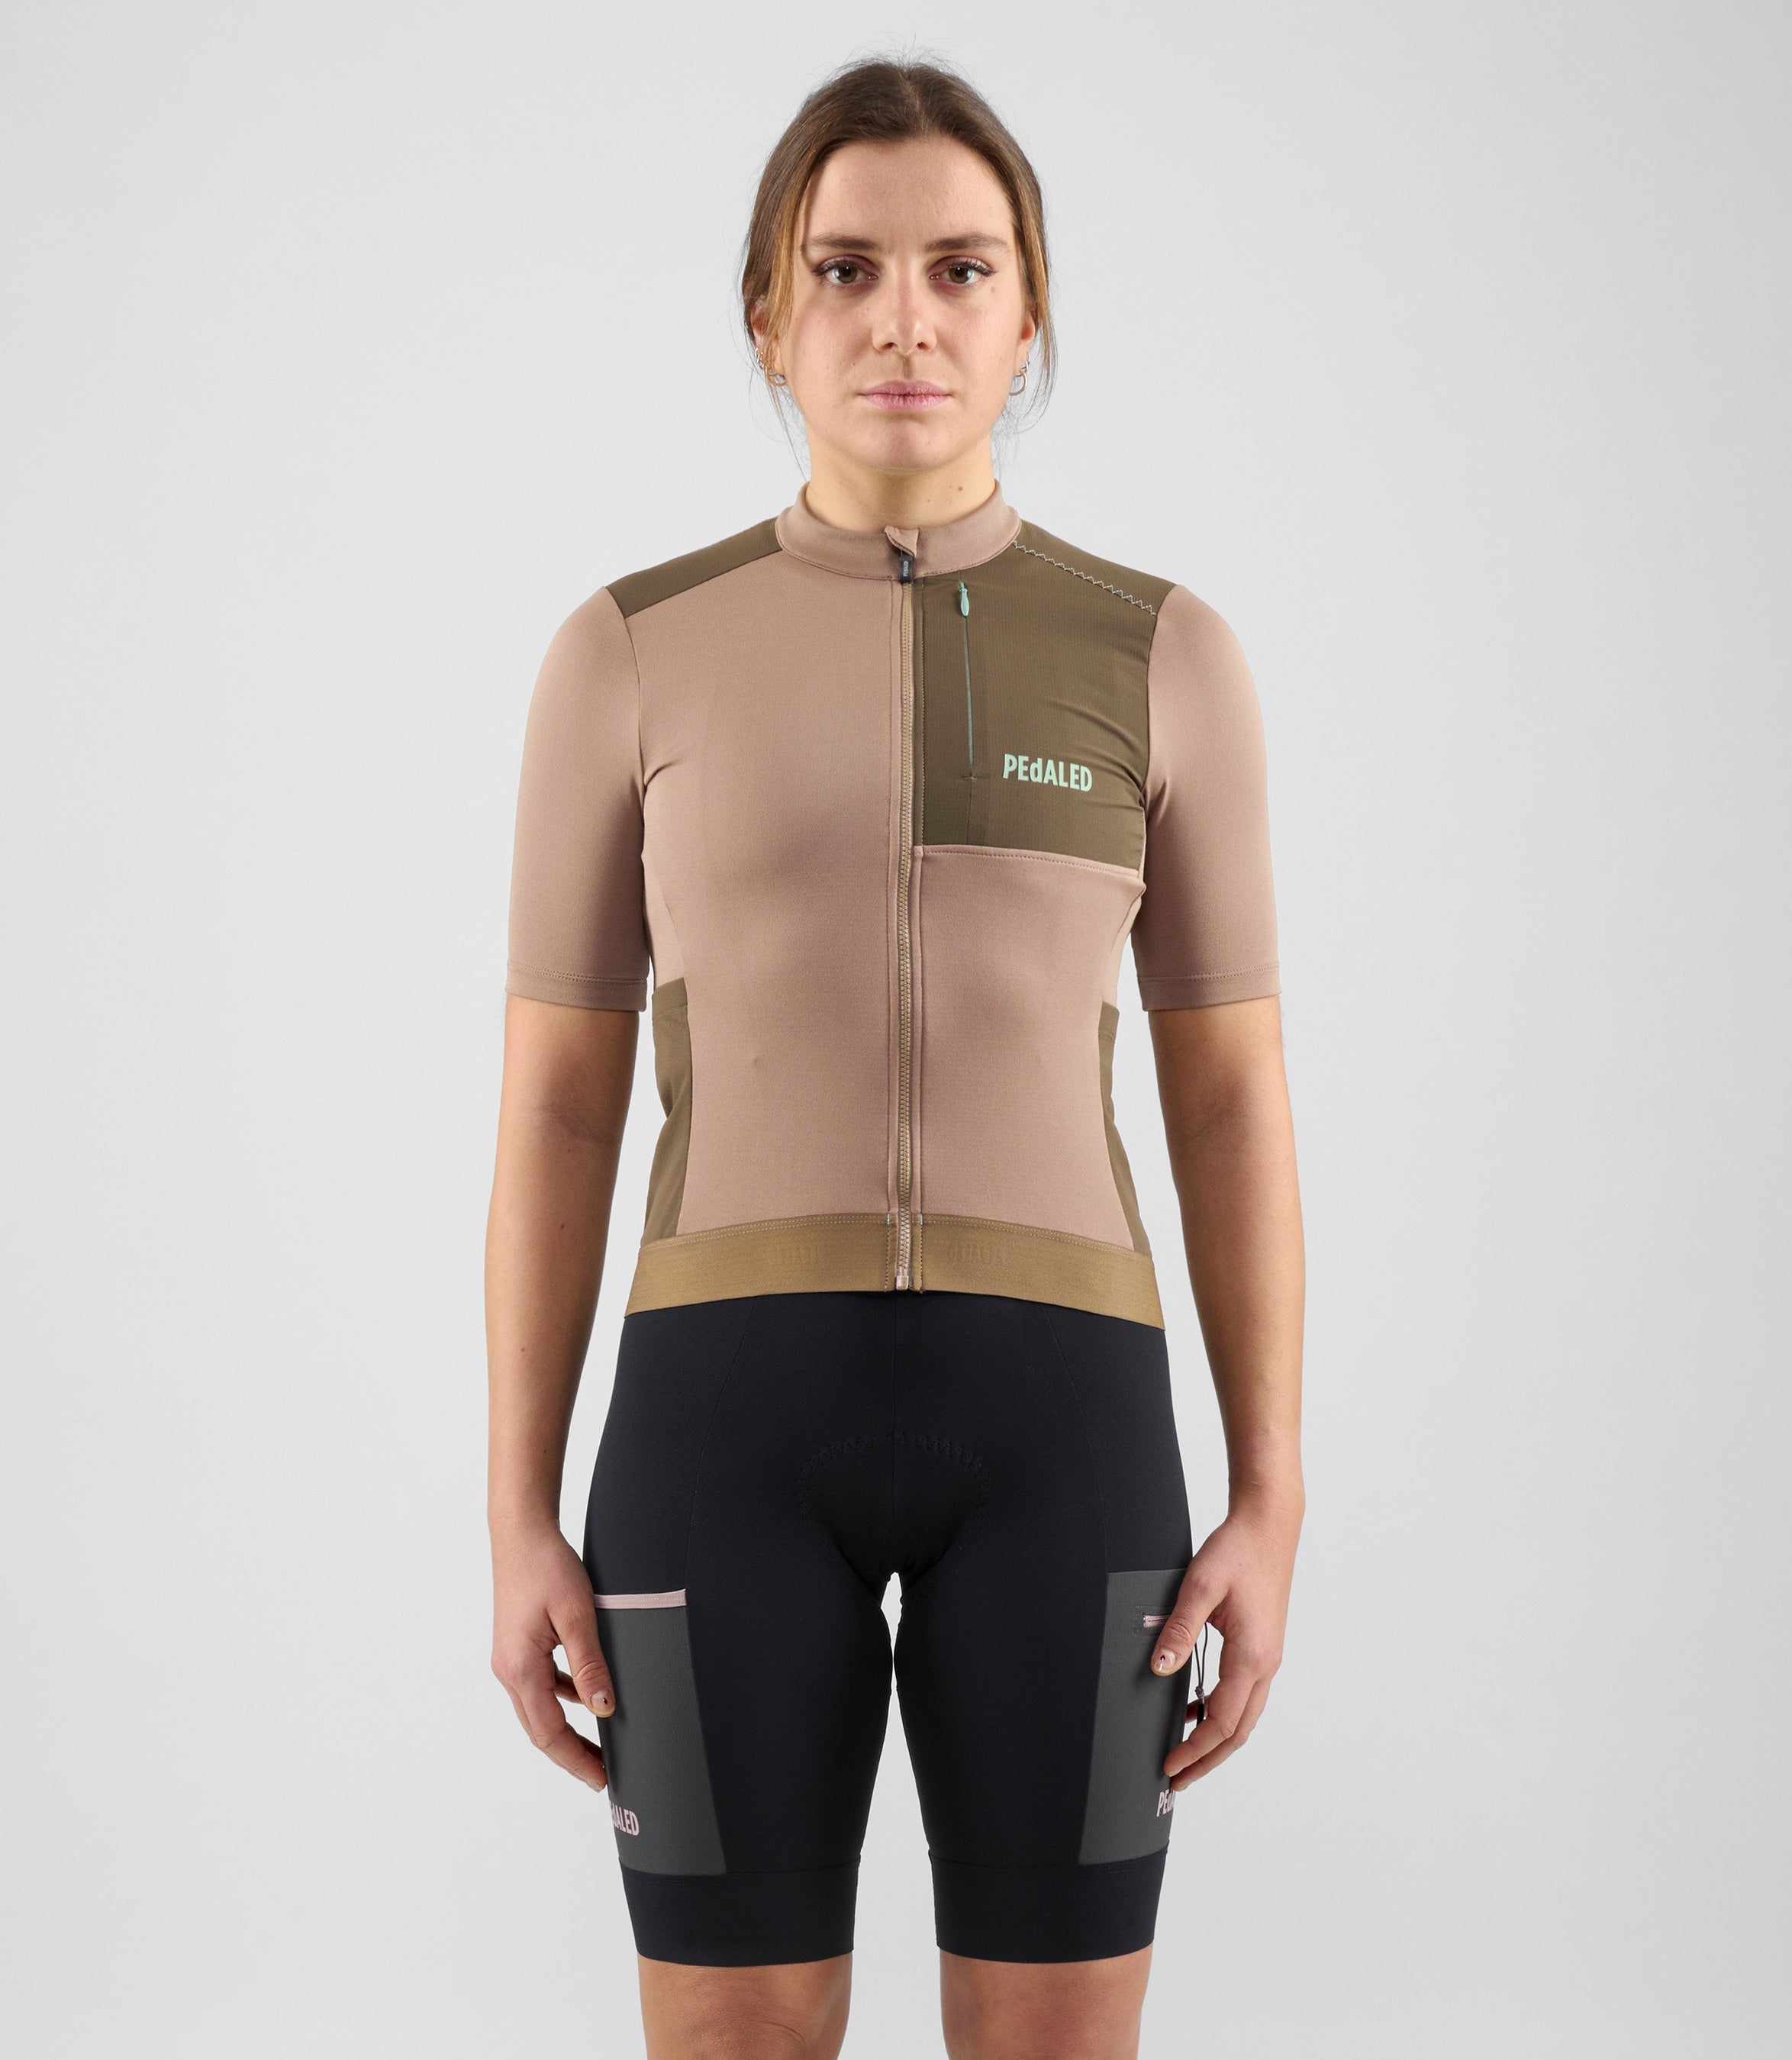 W4SMJOD14PE_3_women cycling merino jersey brown odyssey total body front pedaled